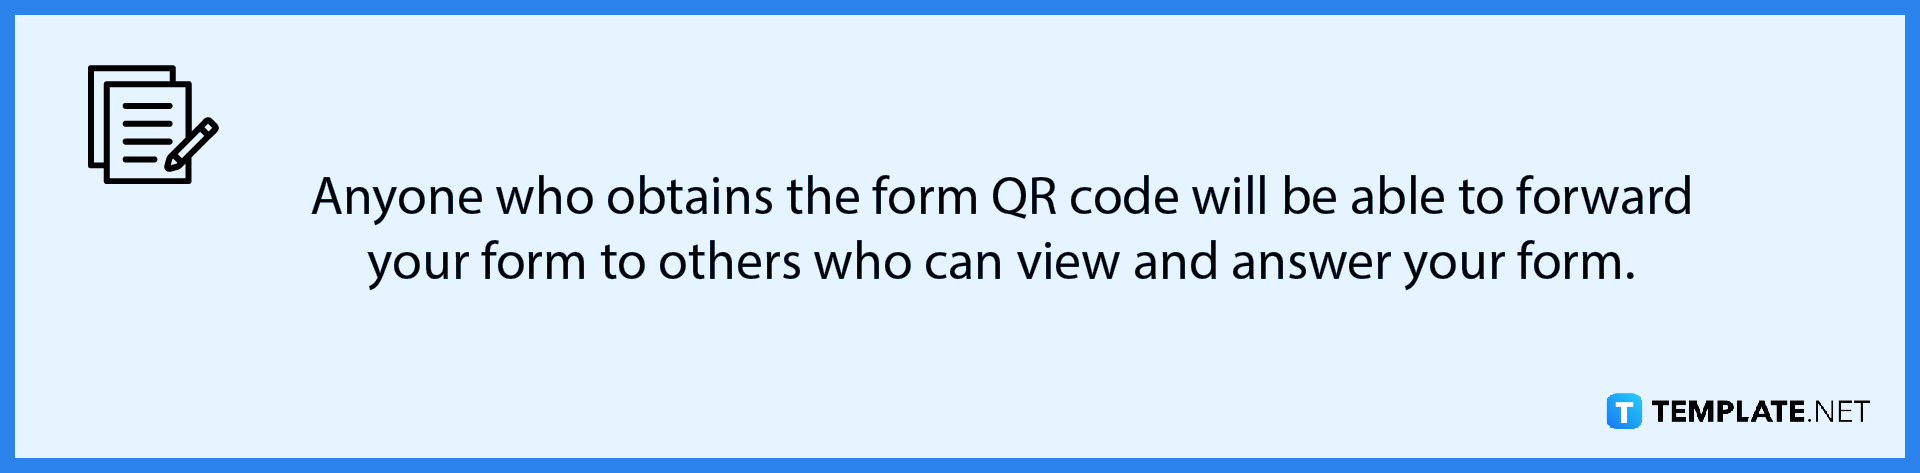 how-to-create-a-qr-code-in-microsoft-forms-note-1